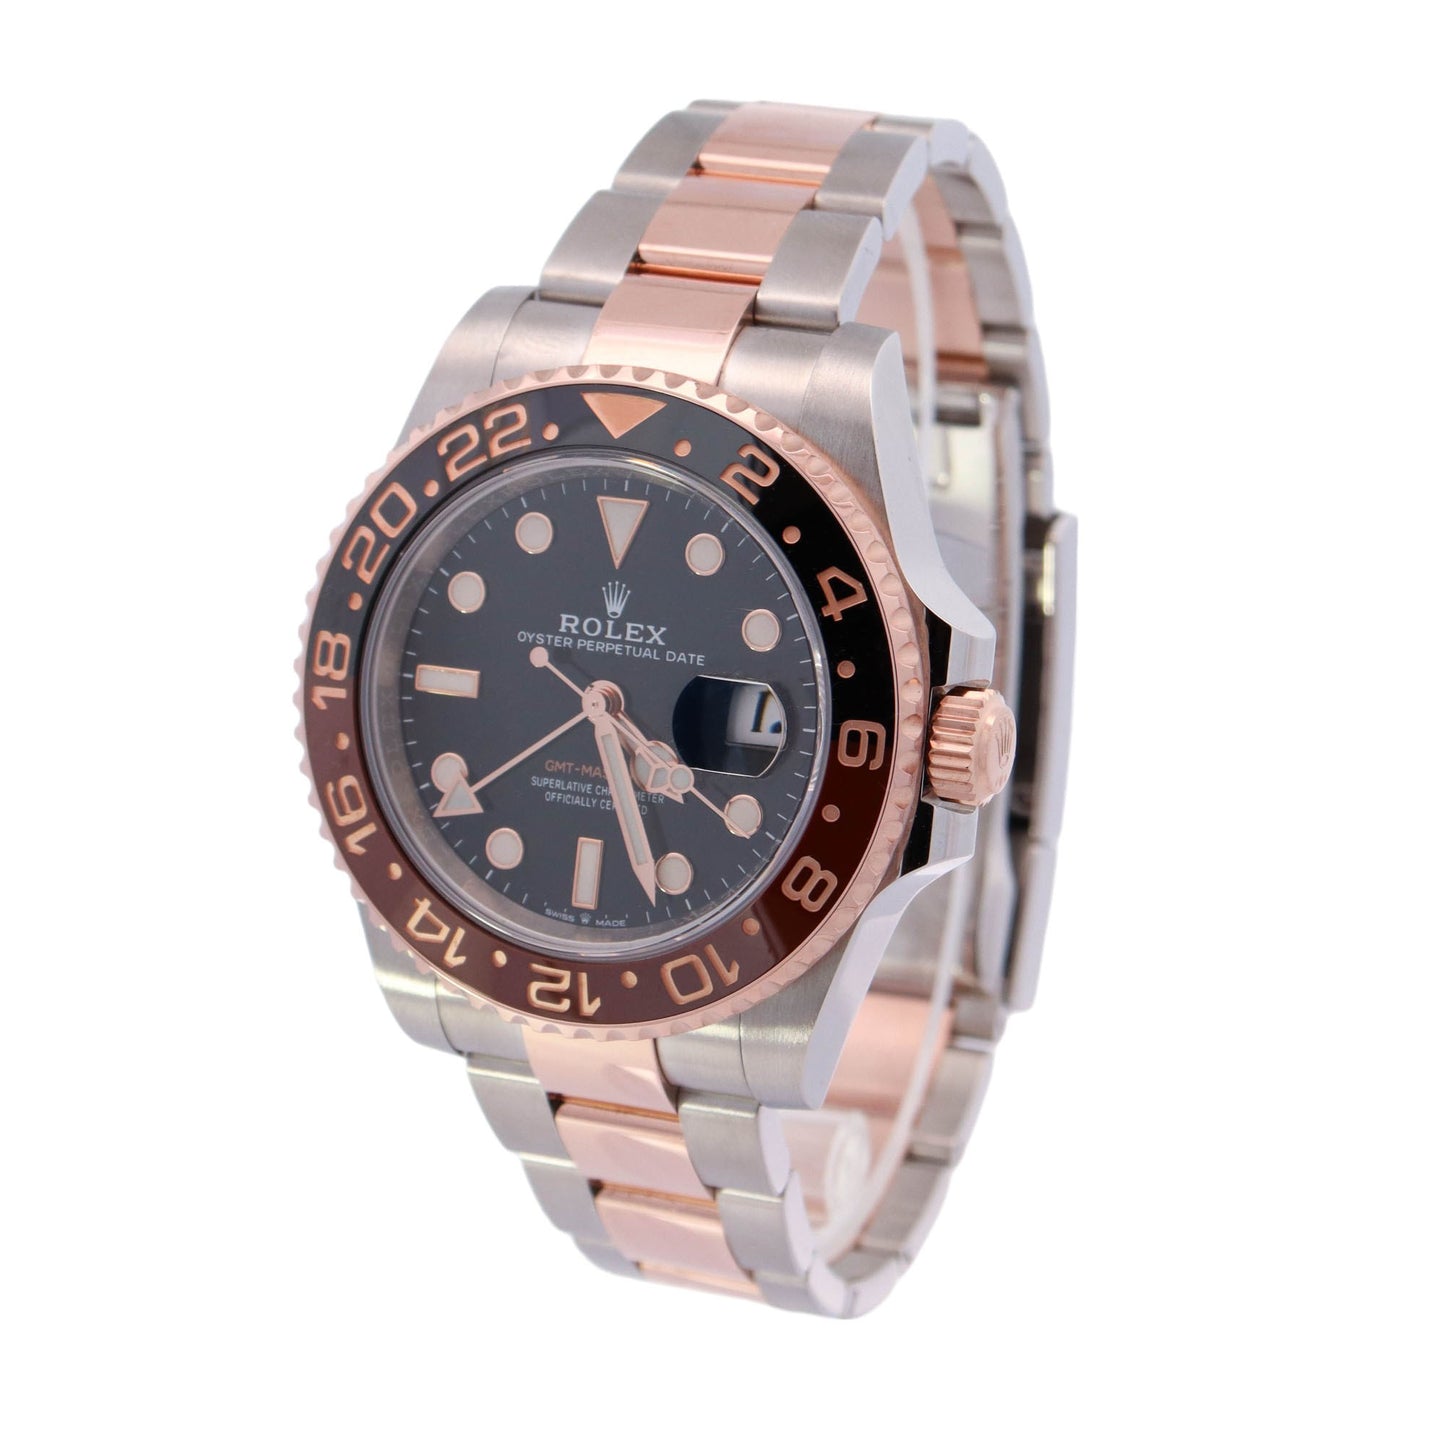 Rolex GMT Master II "Rootbeer" Two Tone Rose Gold & Steel 40mm Black Dot Dial Watch Reference# 126711CHNR